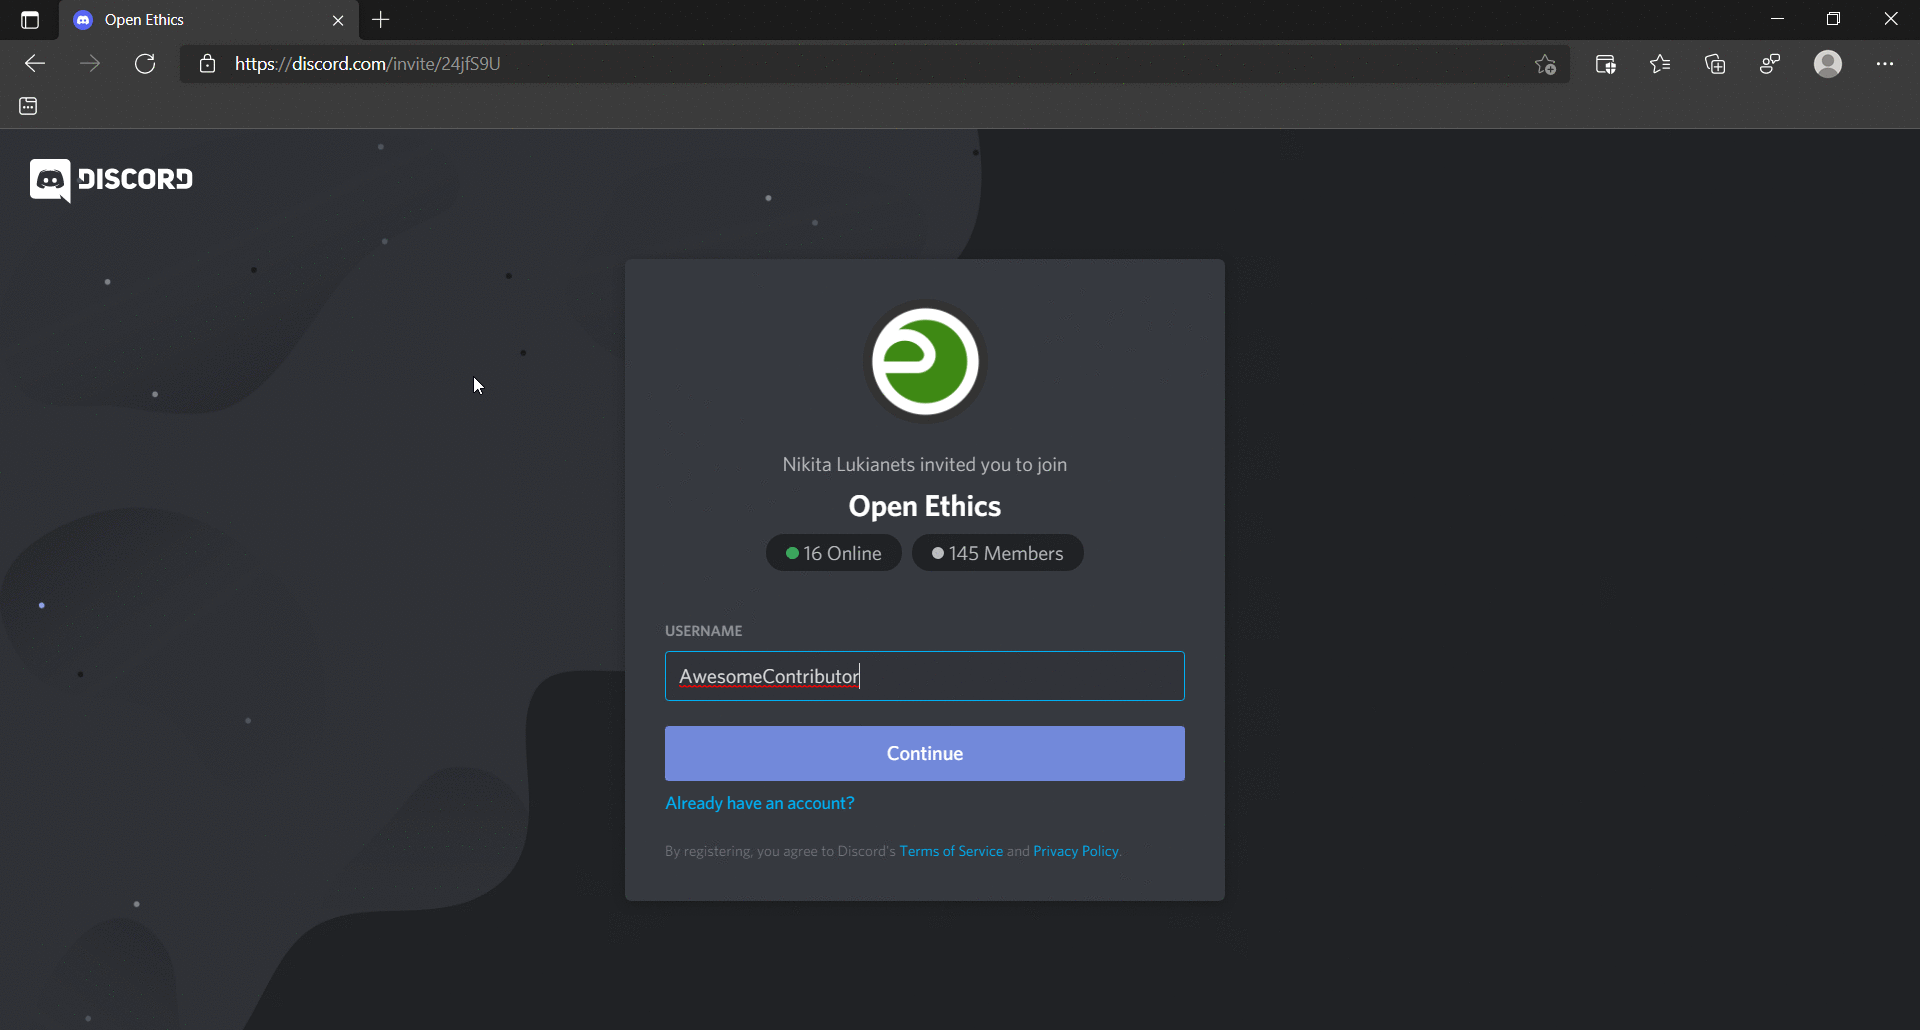 Instructions to Join Discord